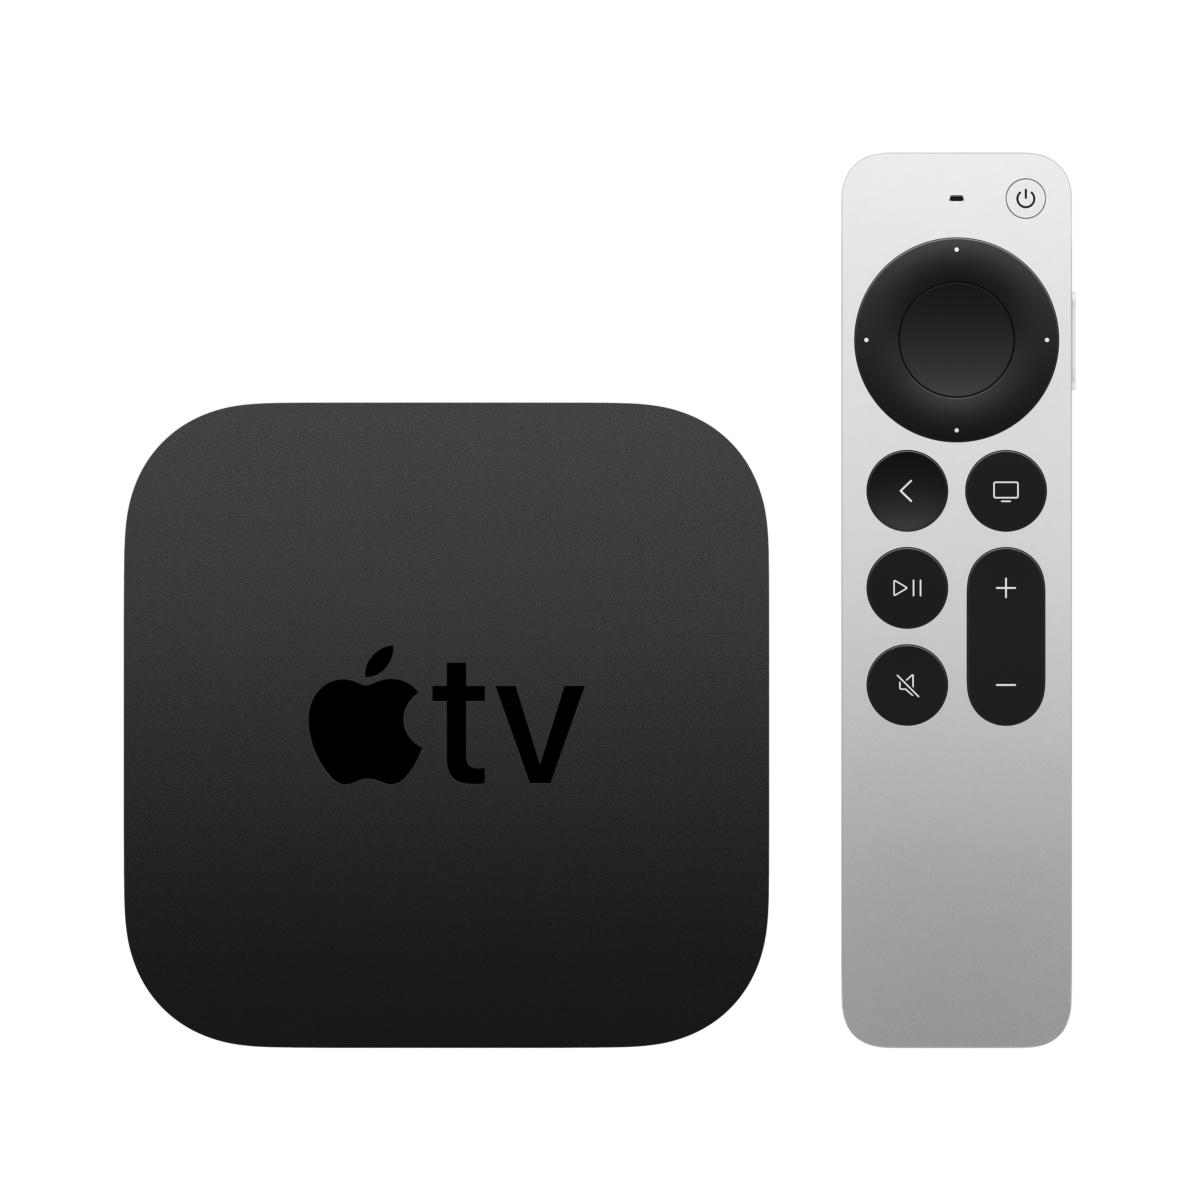 MXH02LL/A - $112 - Apple TV 4K 2nd BLACK : Remote Included (Voice Control, Smart Touch), Dolby Atmos, Dolby Digital Plus, HDMI Port